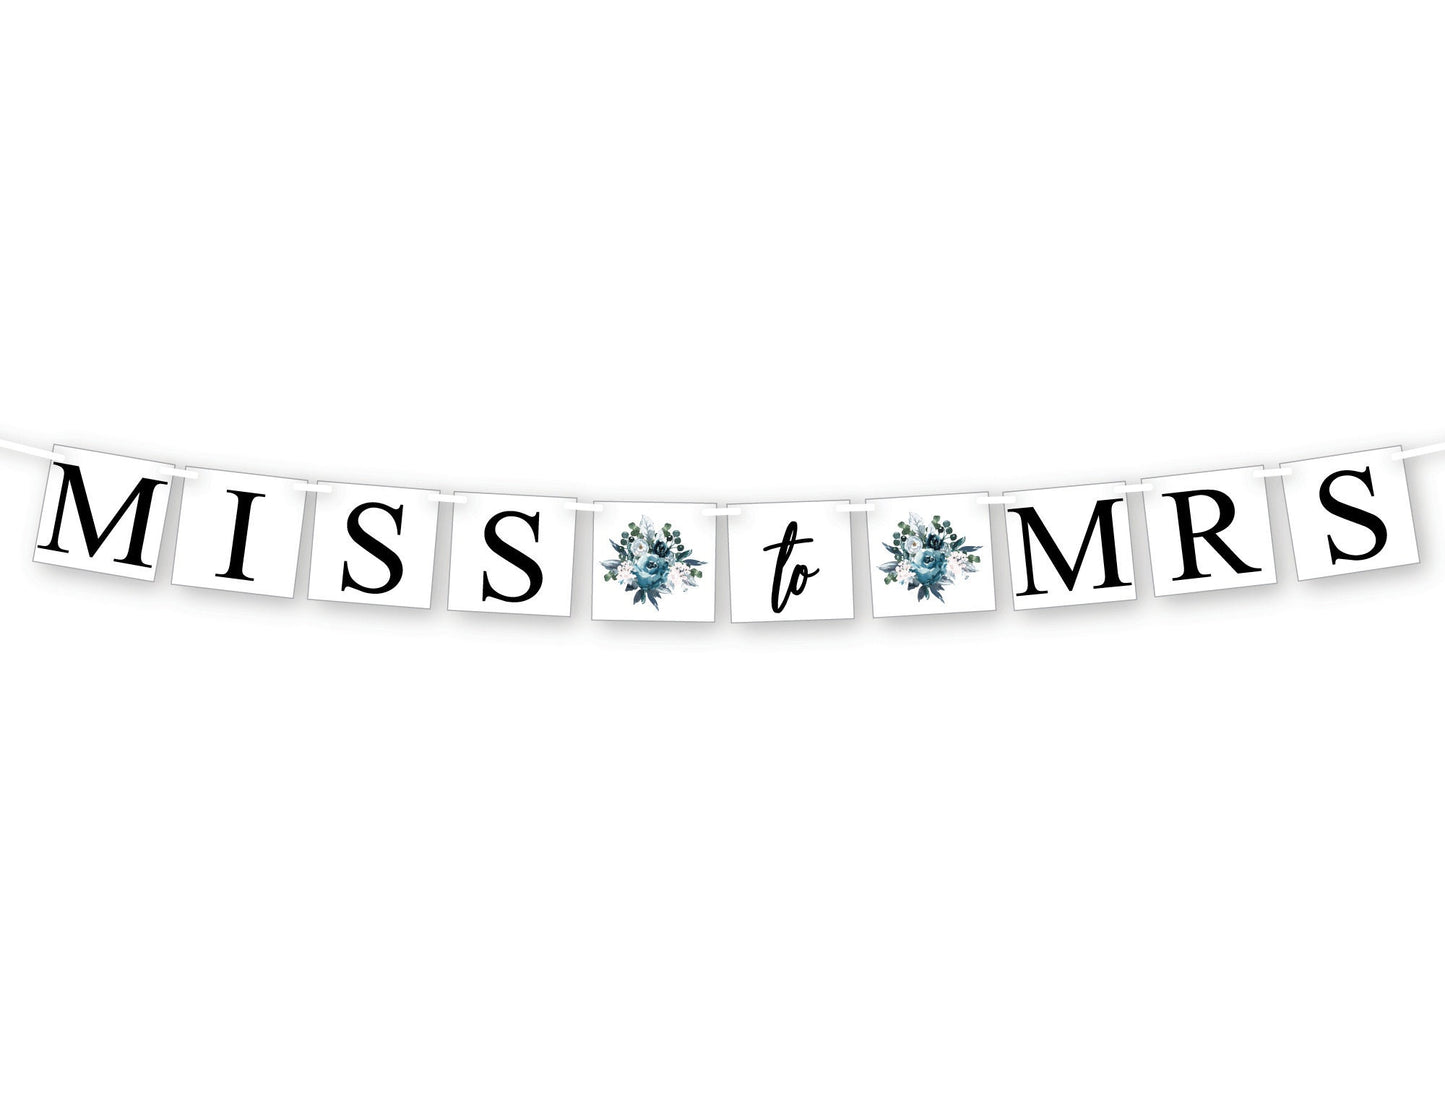 miss to mrs banner - blue watercolor flower bridal shower decorations